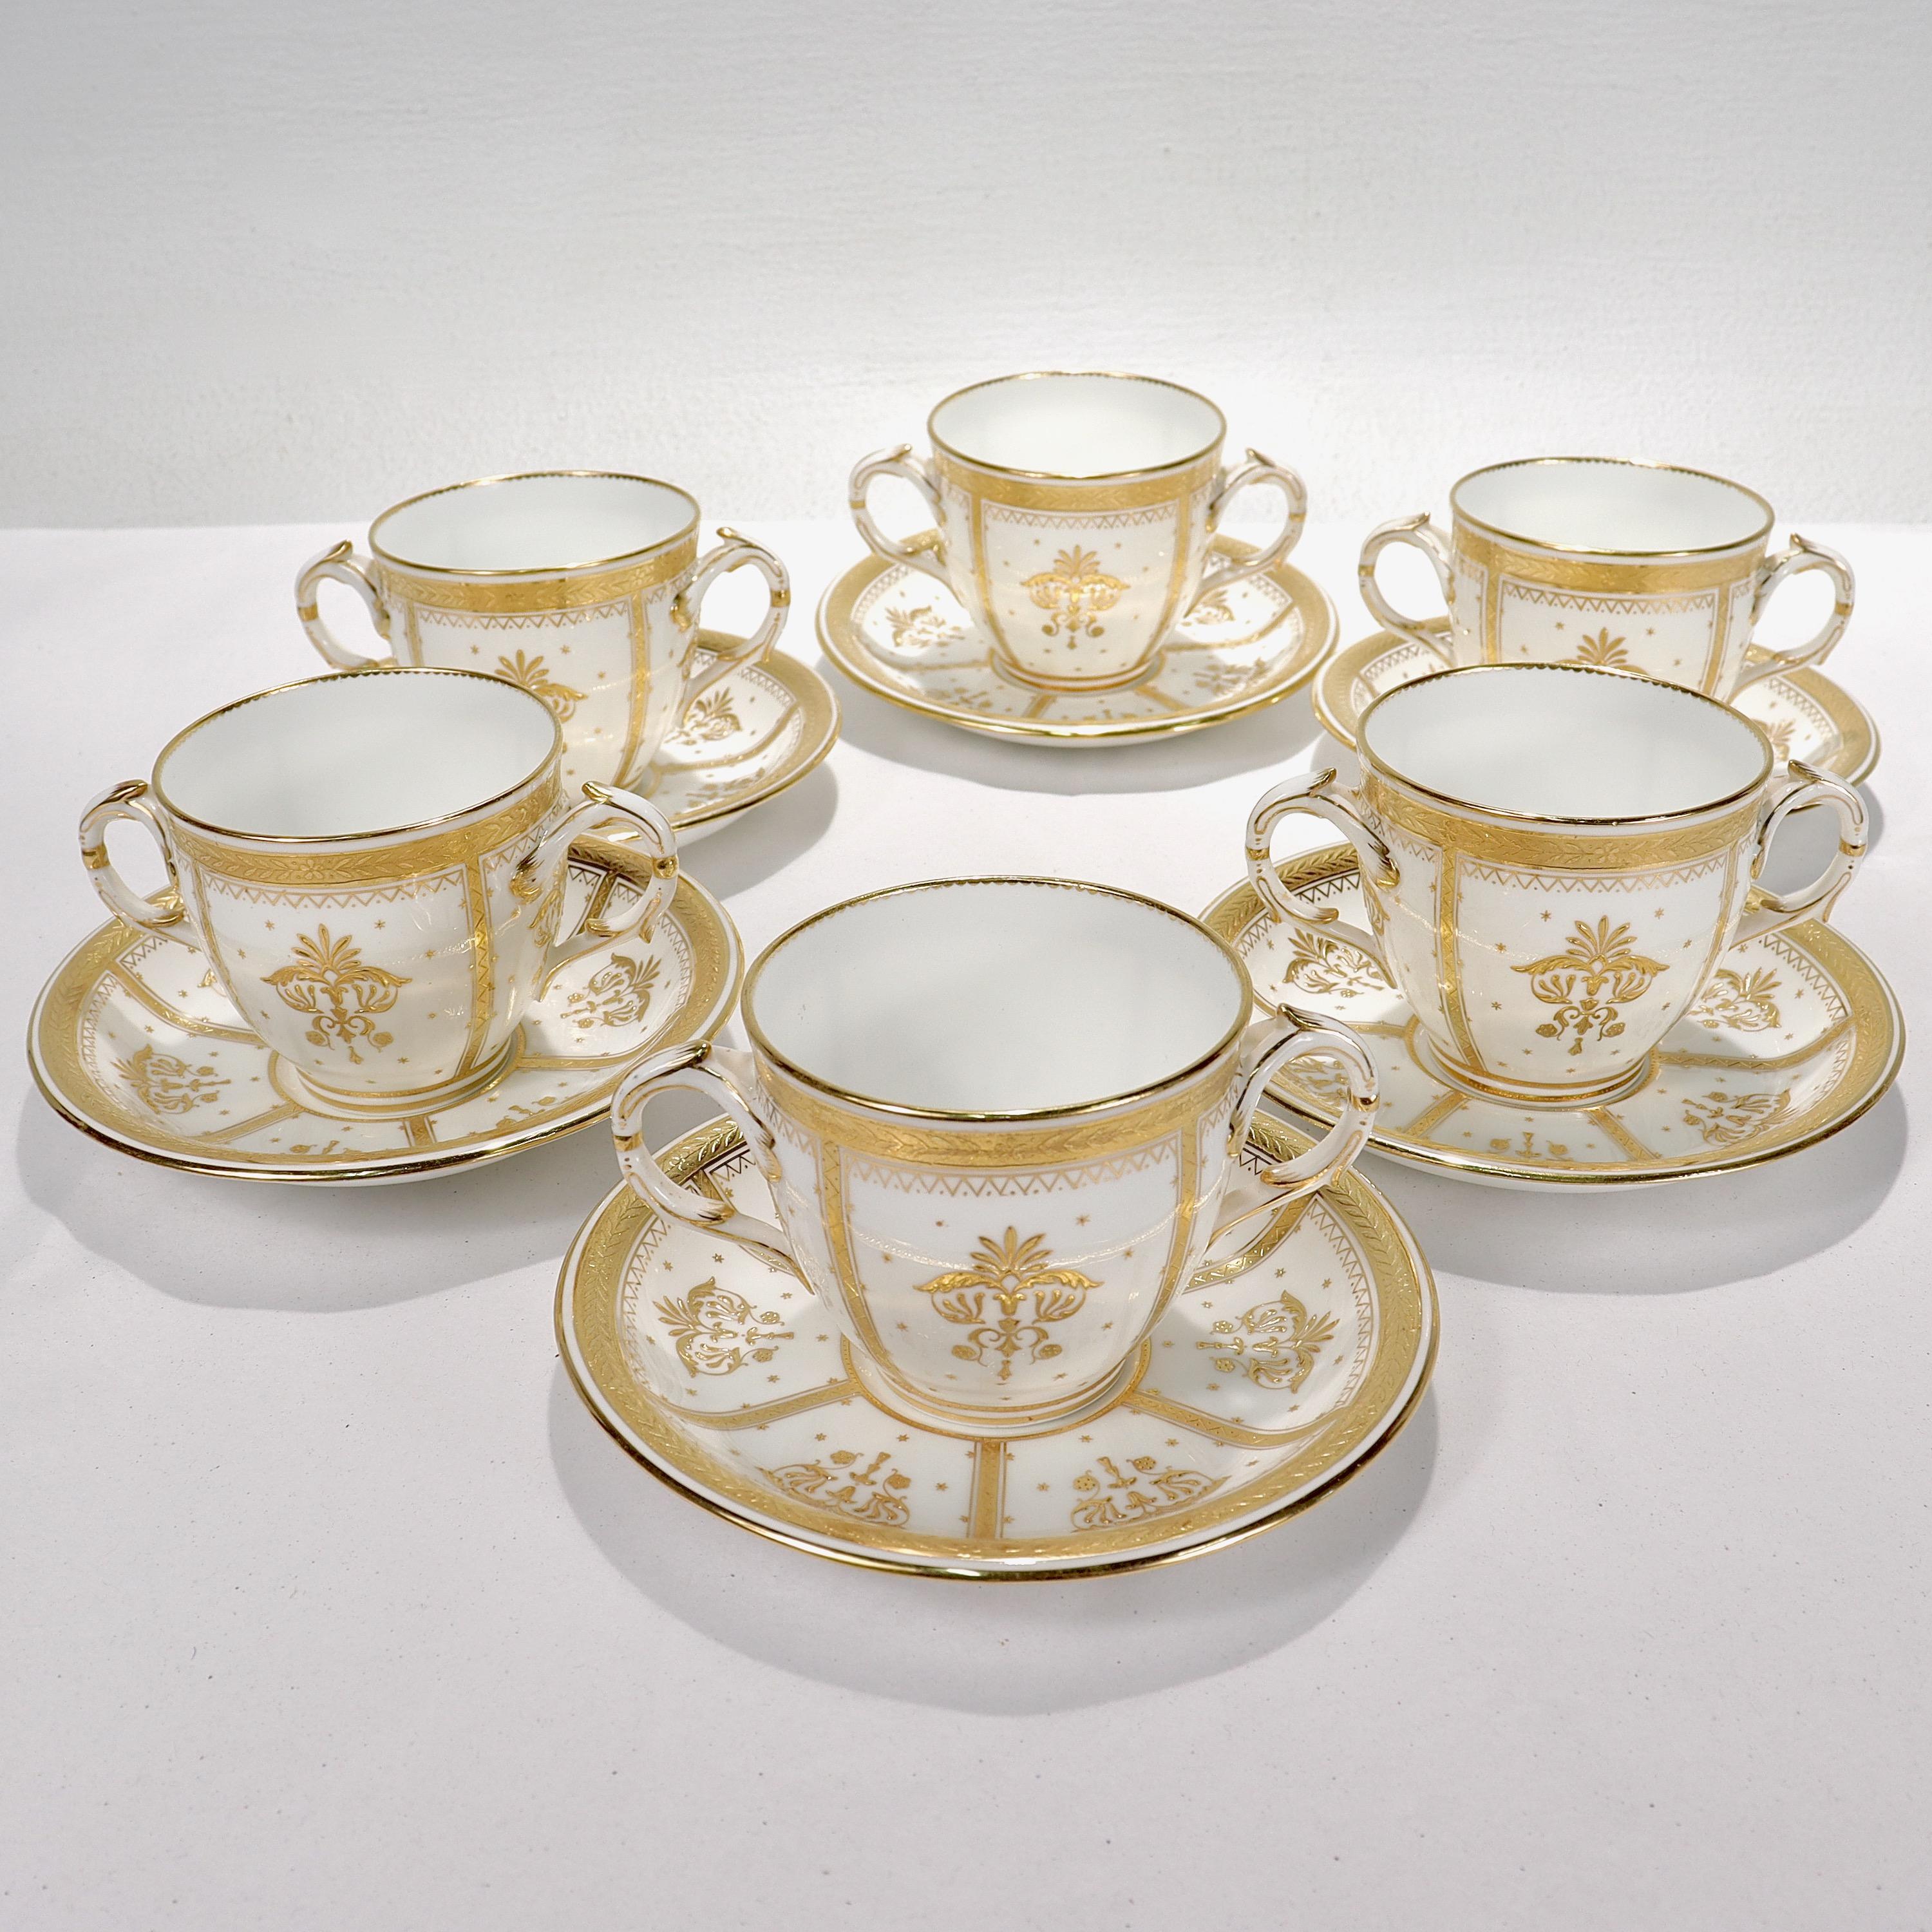 A fine set of 6 richly gilt porcelain bullion or tea cups.

By Mintons.

In an Aesthetic Movement numbered pattern with raised gold and gold jeweling throughout.

Each marked to the base with a puce maker's mark that reads 58013 / Manufactured for